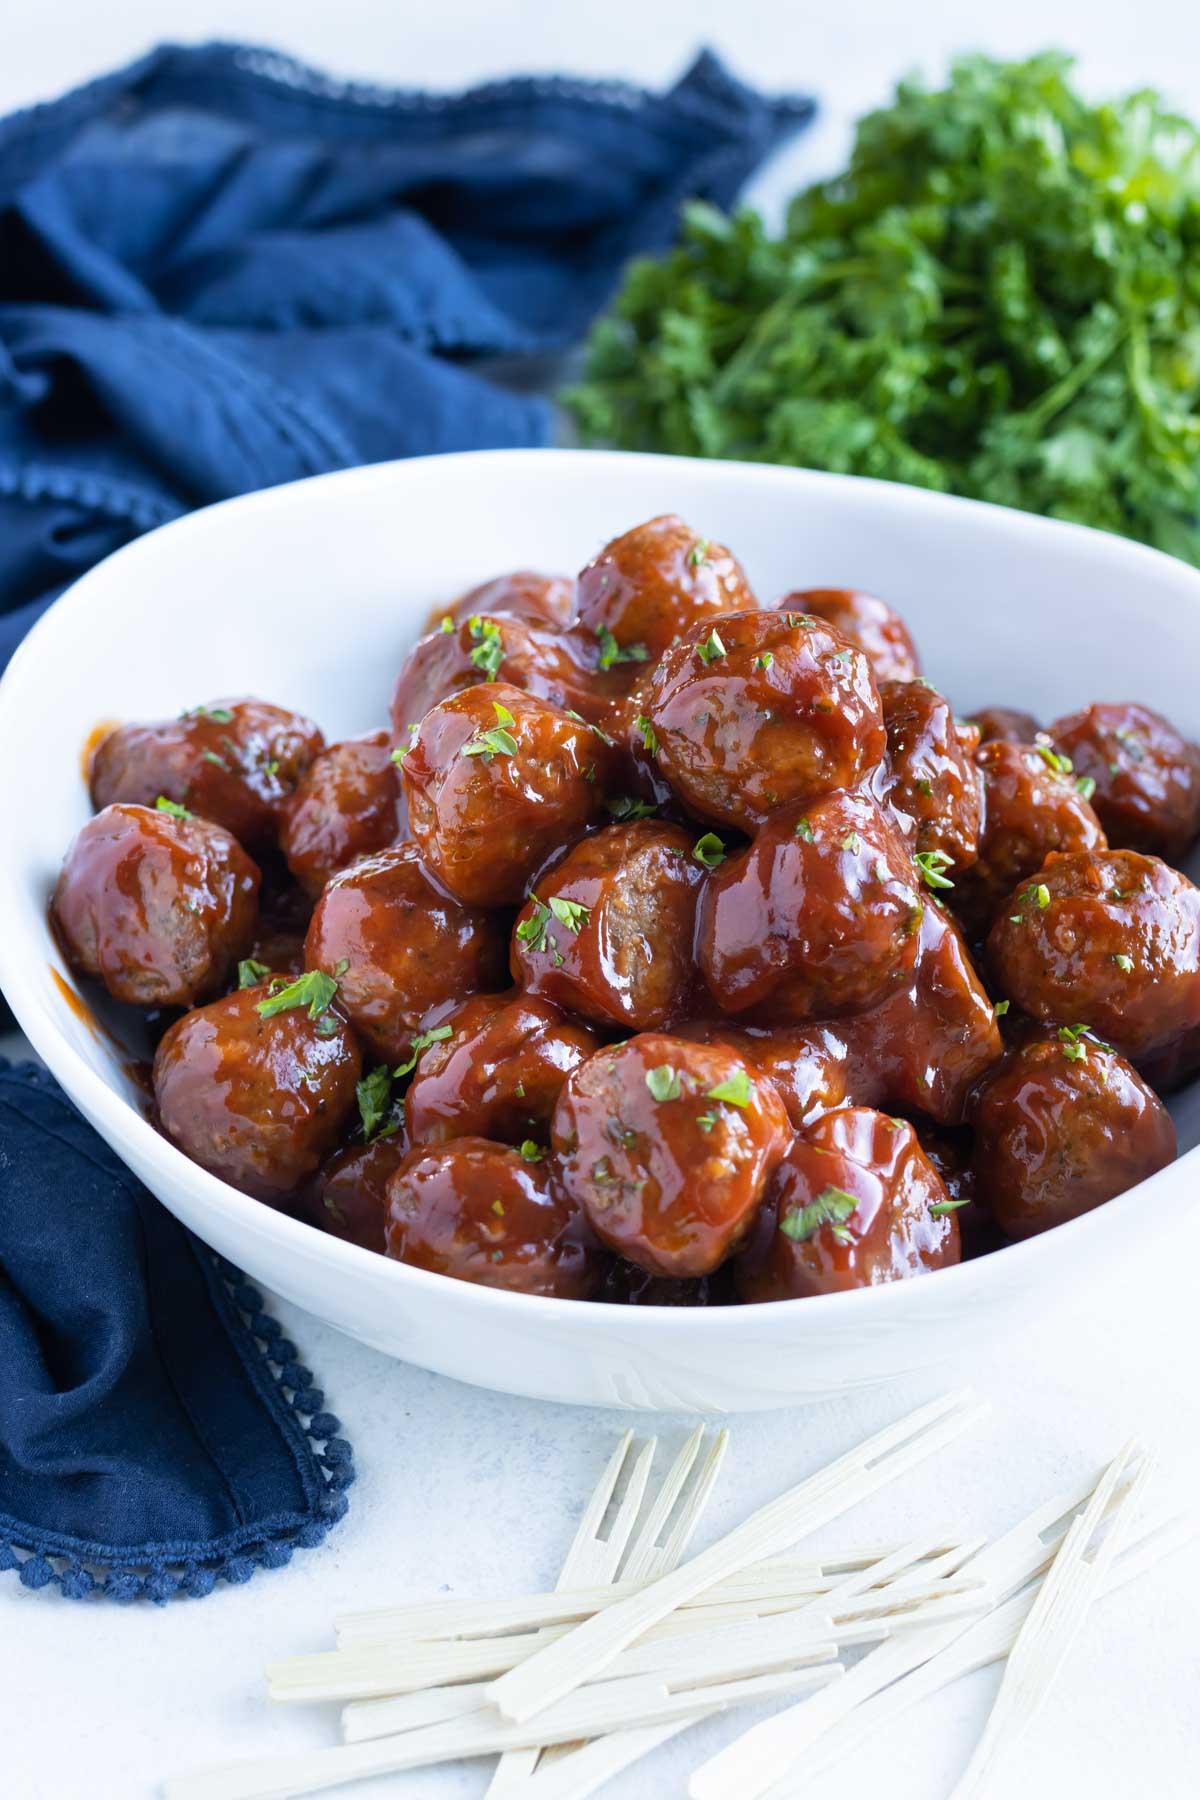 Meatballs are served in a white bowl for an appetizer.